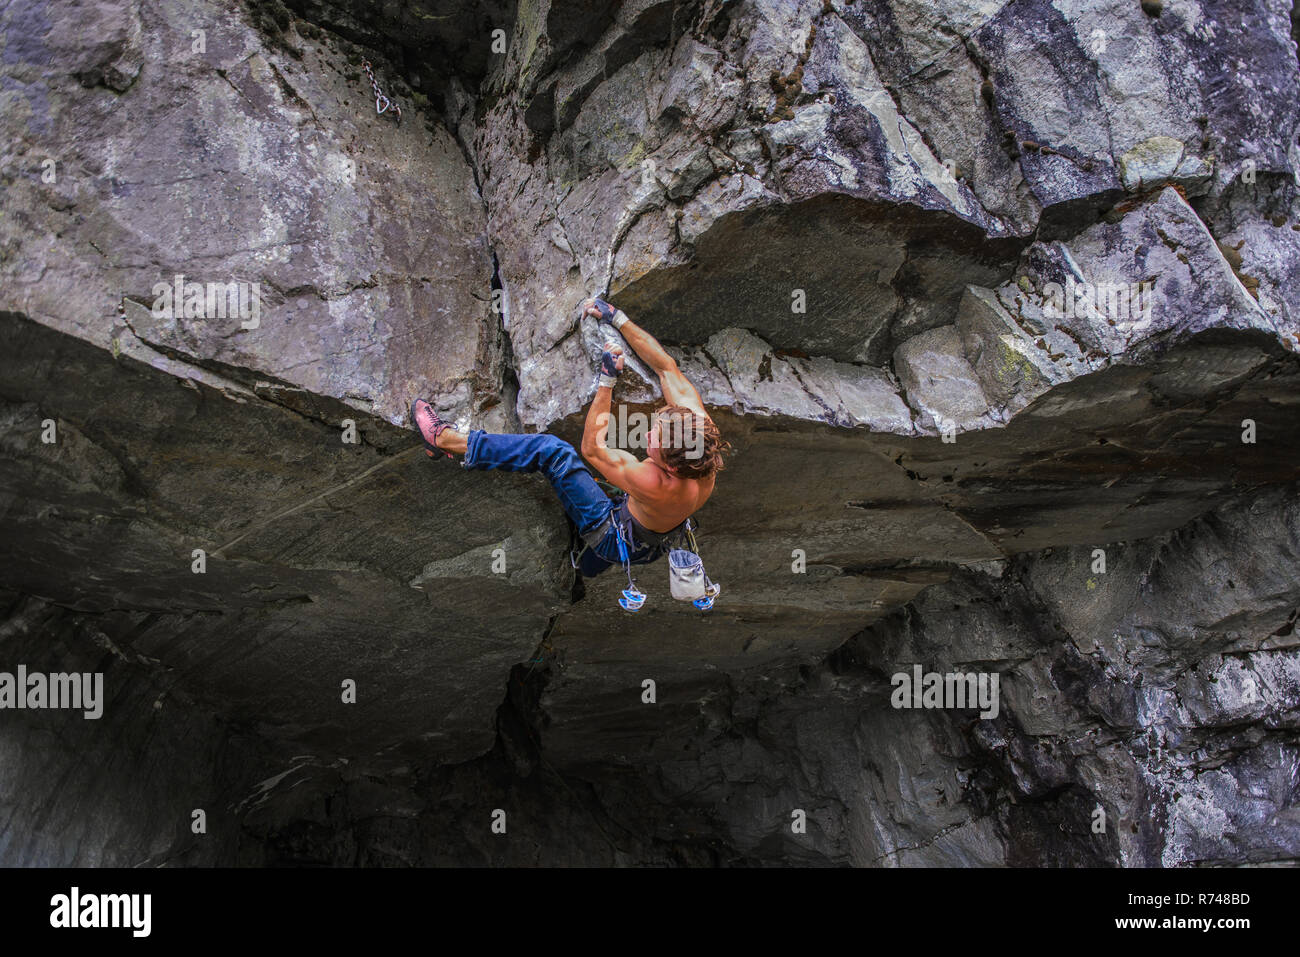 Trad climbing roof of My Little Pony route in Squamish, Canada Stock Photo